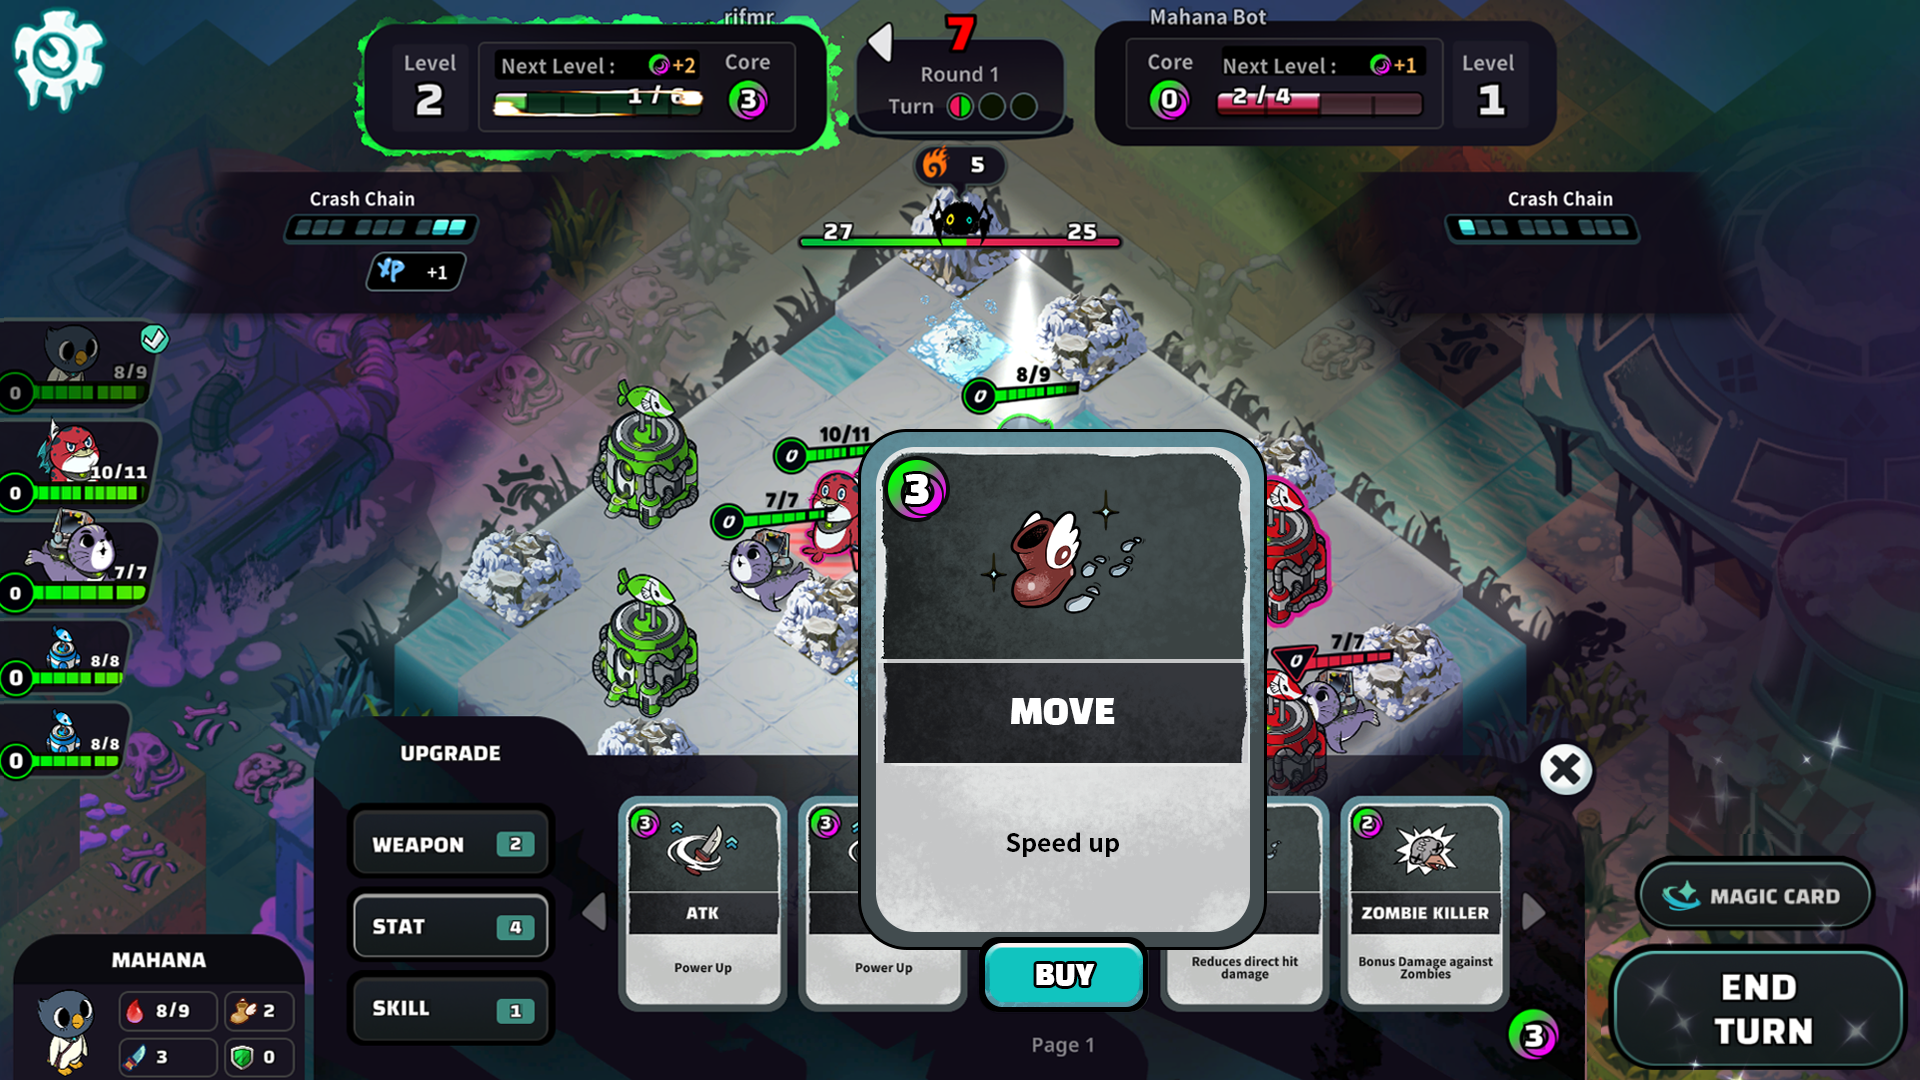 South Pole Bebop - Gameplay, ability card usage